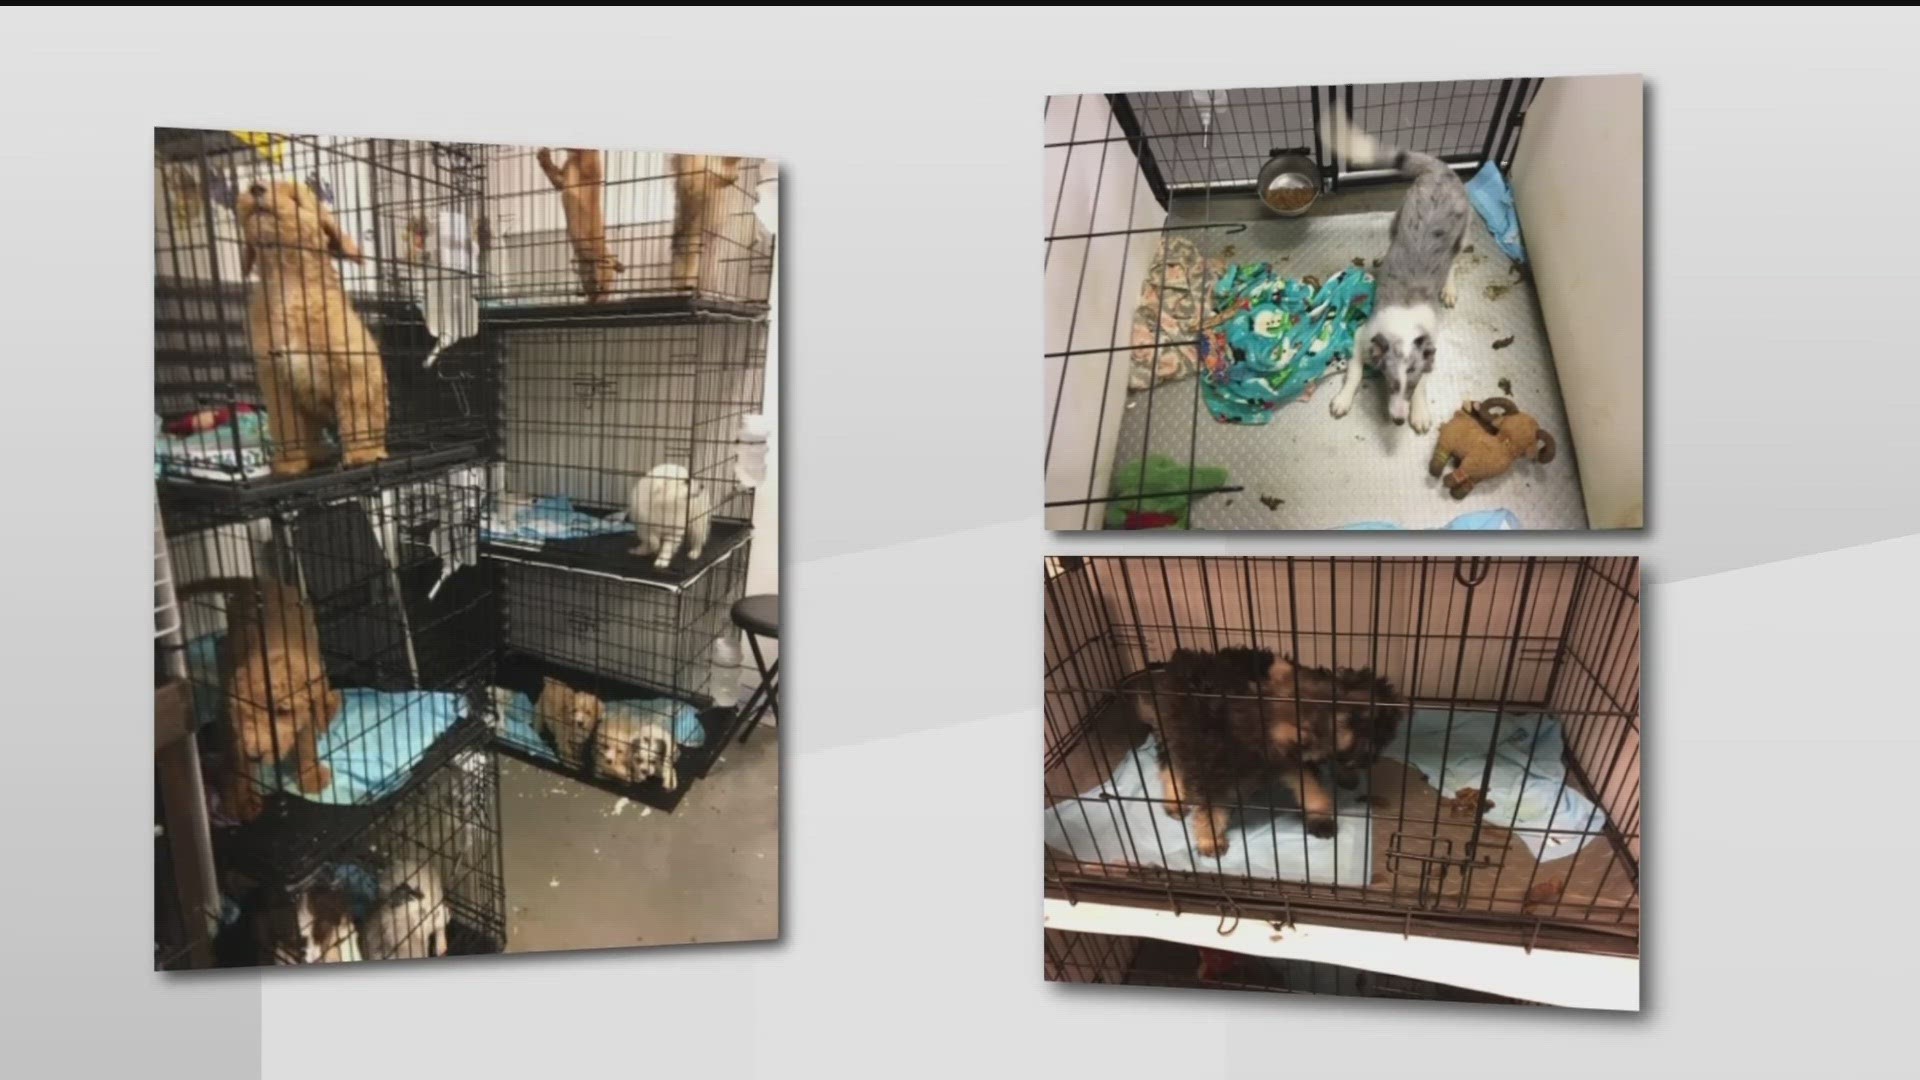 Monica Wong walked into the Gwinnett County Court Tuesday expecting to resolve 60 charges related to cruelty to animals. However, a judge refused to dismiss the case